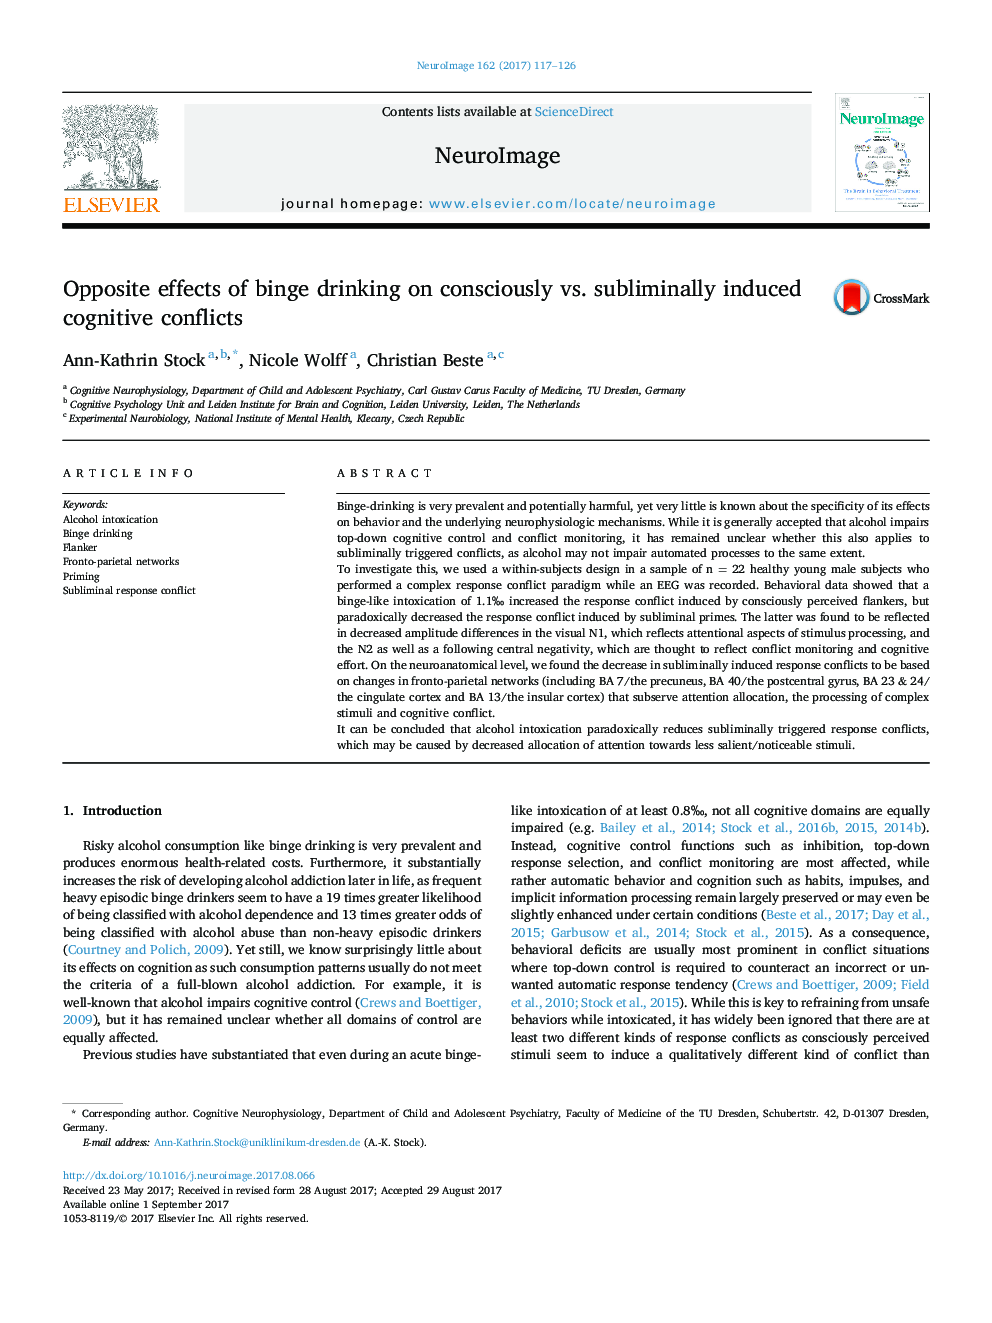 Opposite effects of binge drinking on consciously vs. subliminally induced cognitive conflicts